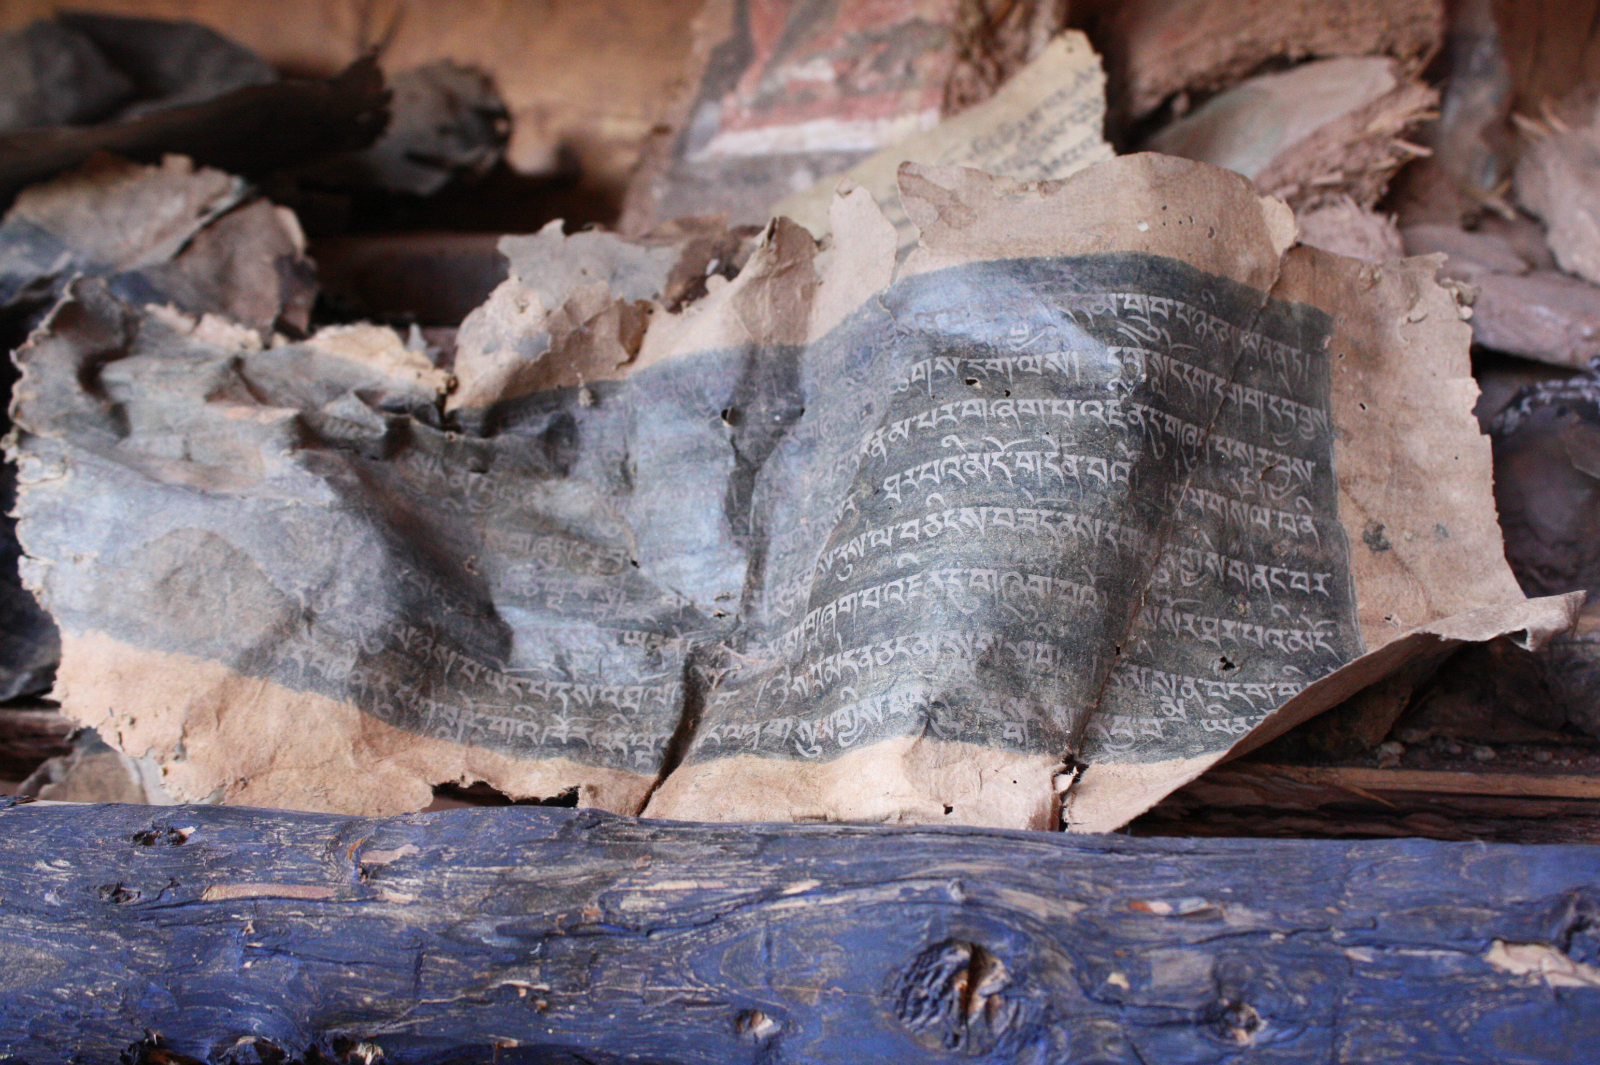 Ancient Buddhist scriptures and relics from a looted pagoda. (Image by Wang Yan